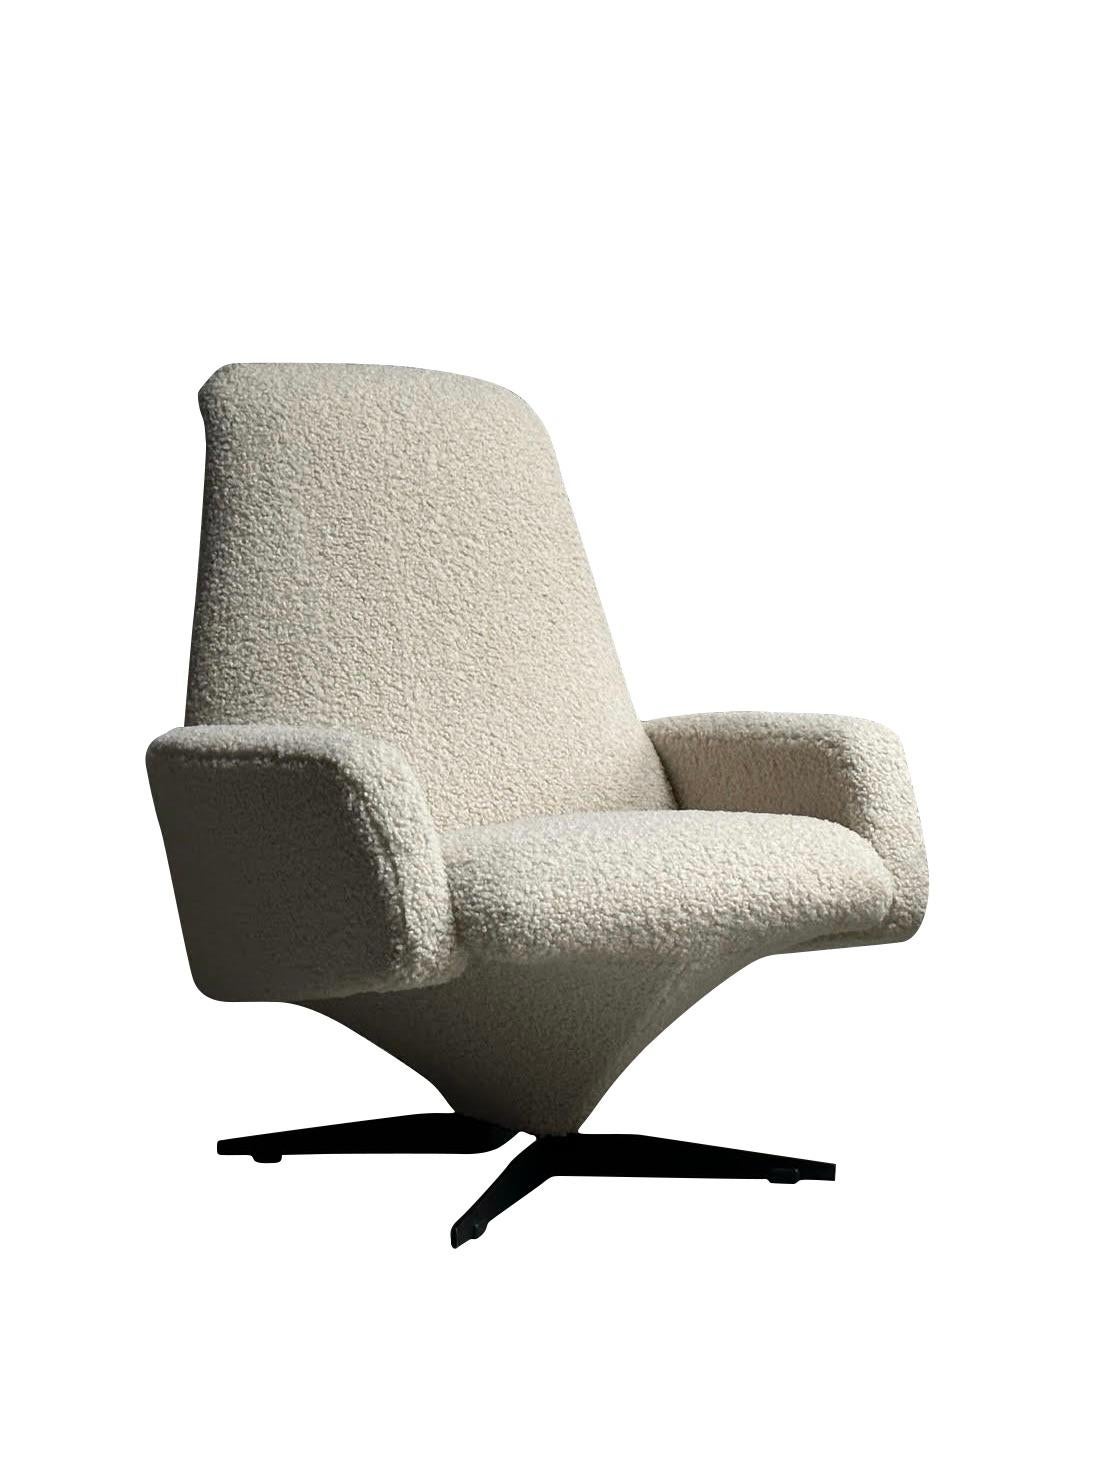 Italian White Bouclé Upholstered Chair with Ottoman, Italy, 1960s For Sale